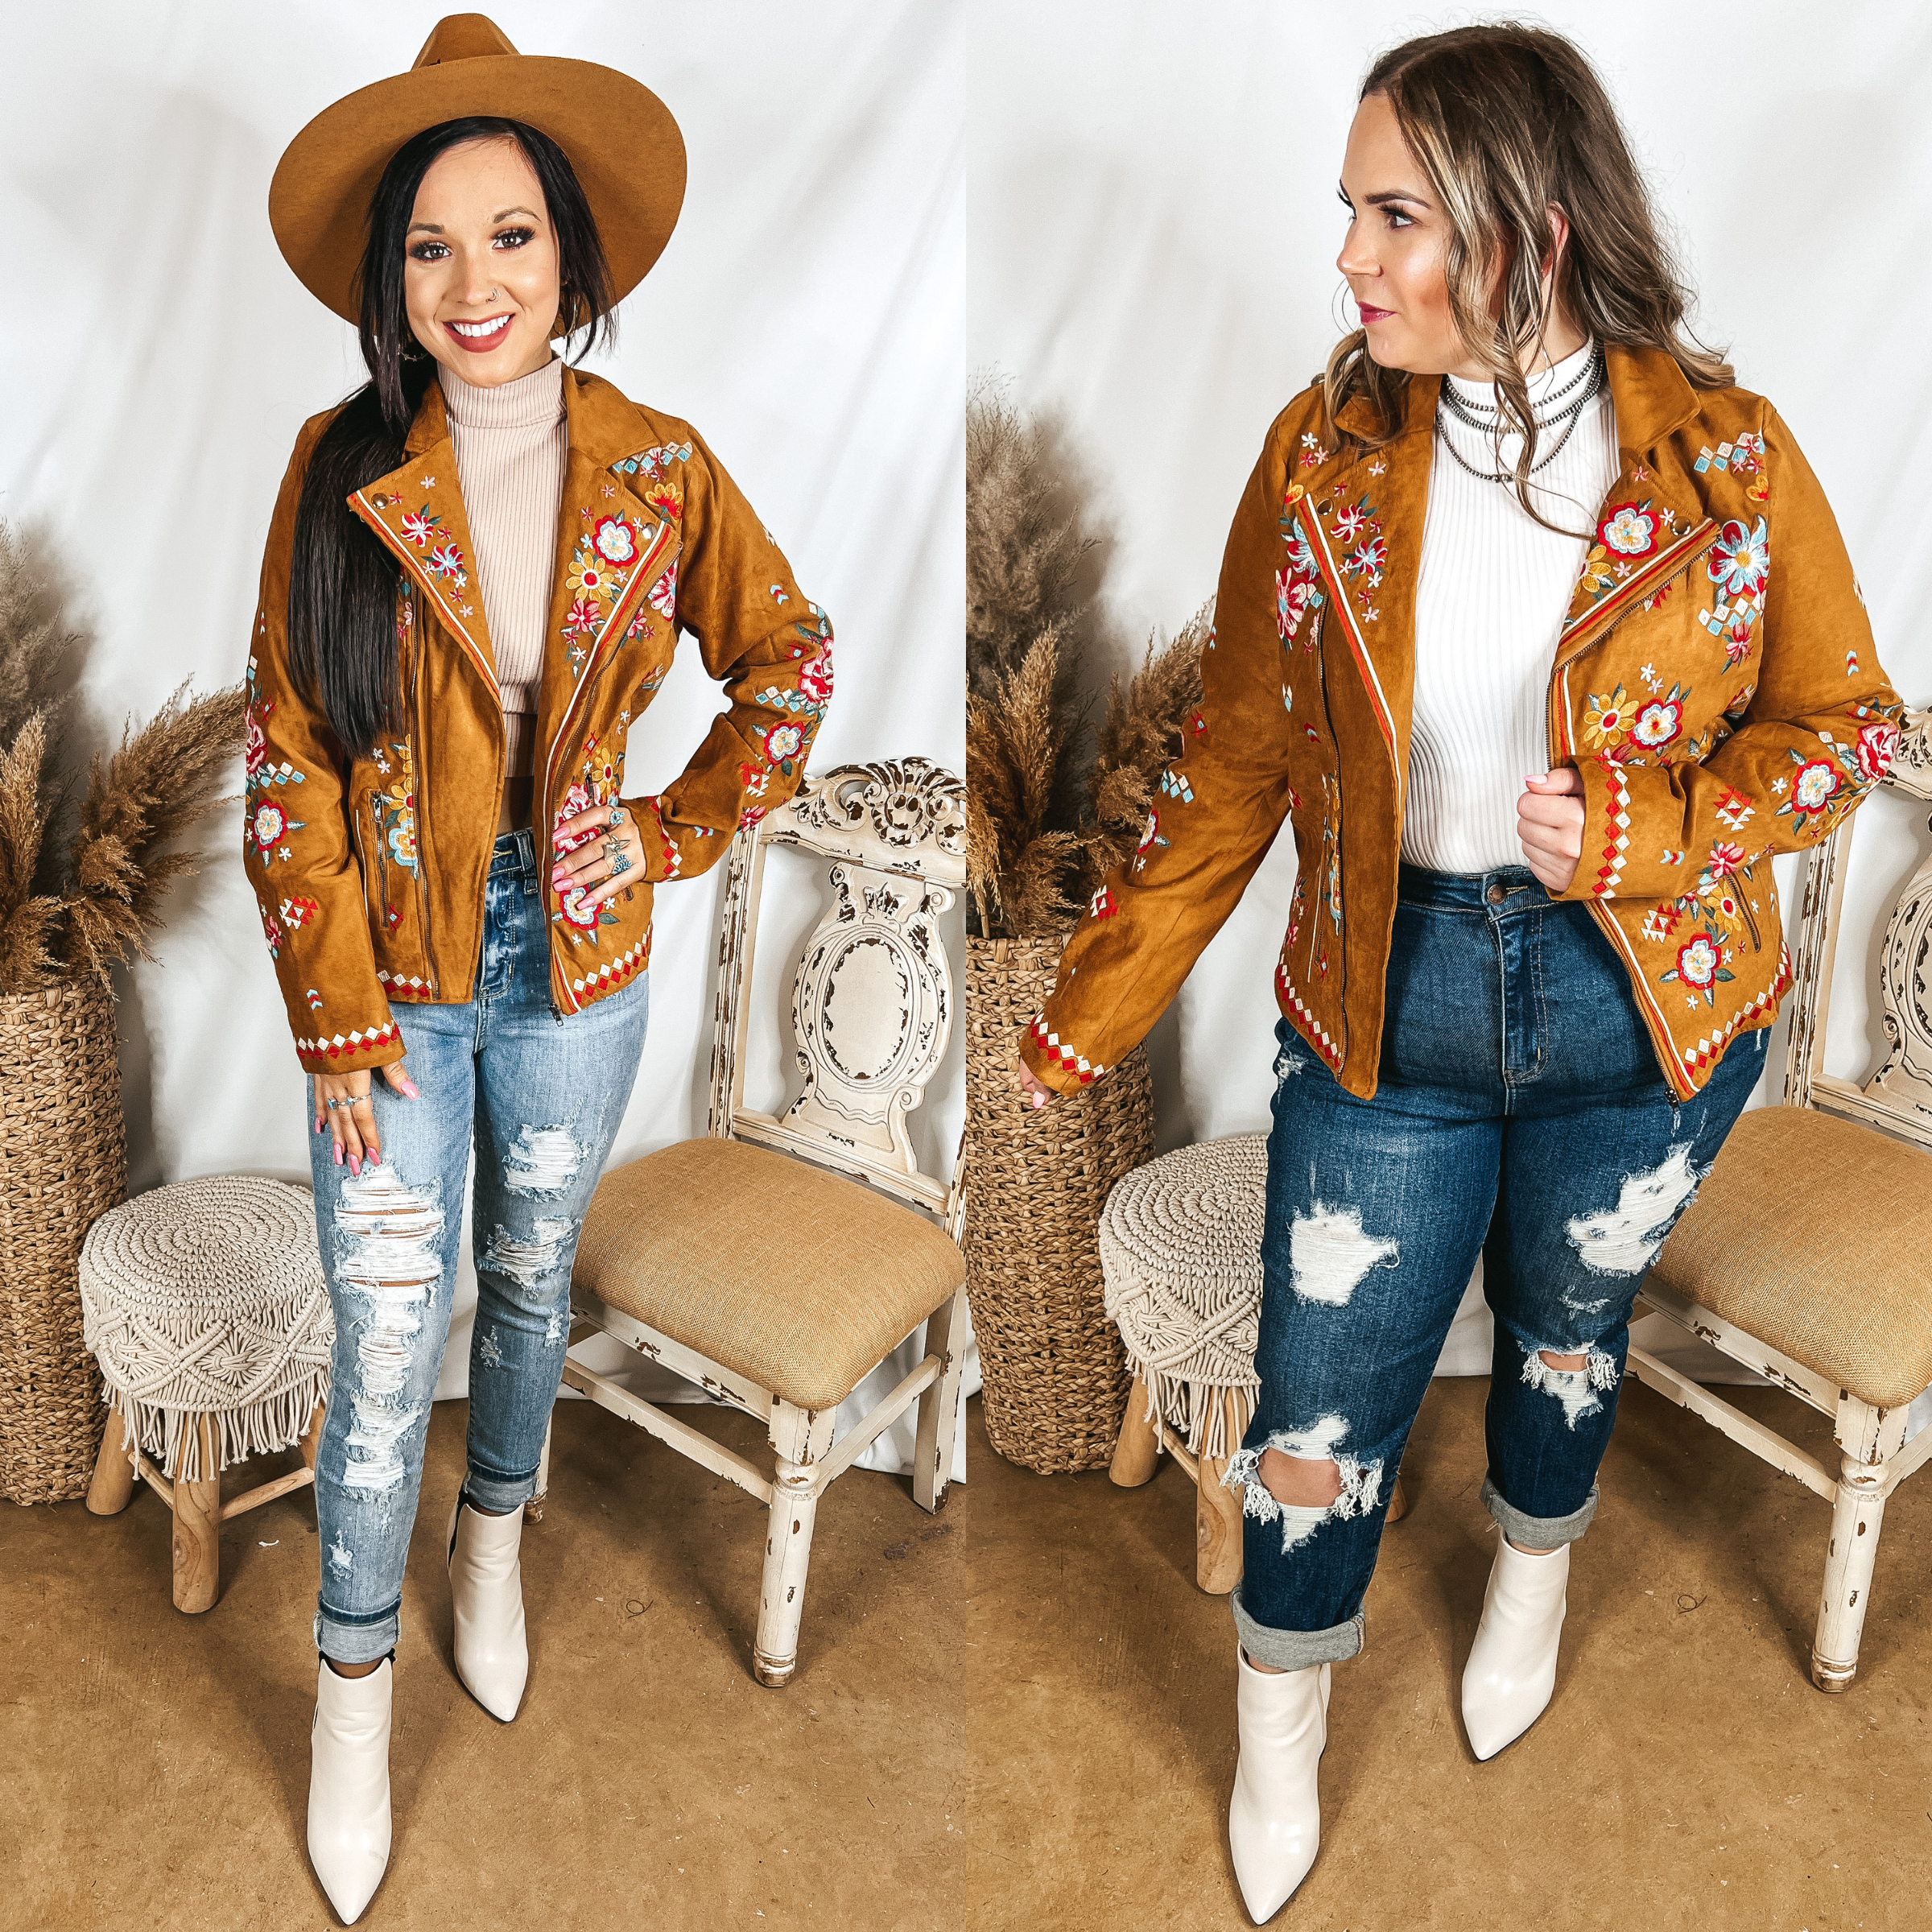 Models are wearing a tan embroidered jacket that is suede. Size small model has it paired with distressed light wash jeans, white booties, and a brown hat. Size large model has it paired with dark wash distressed jeans, white booties, and silver jewelry.